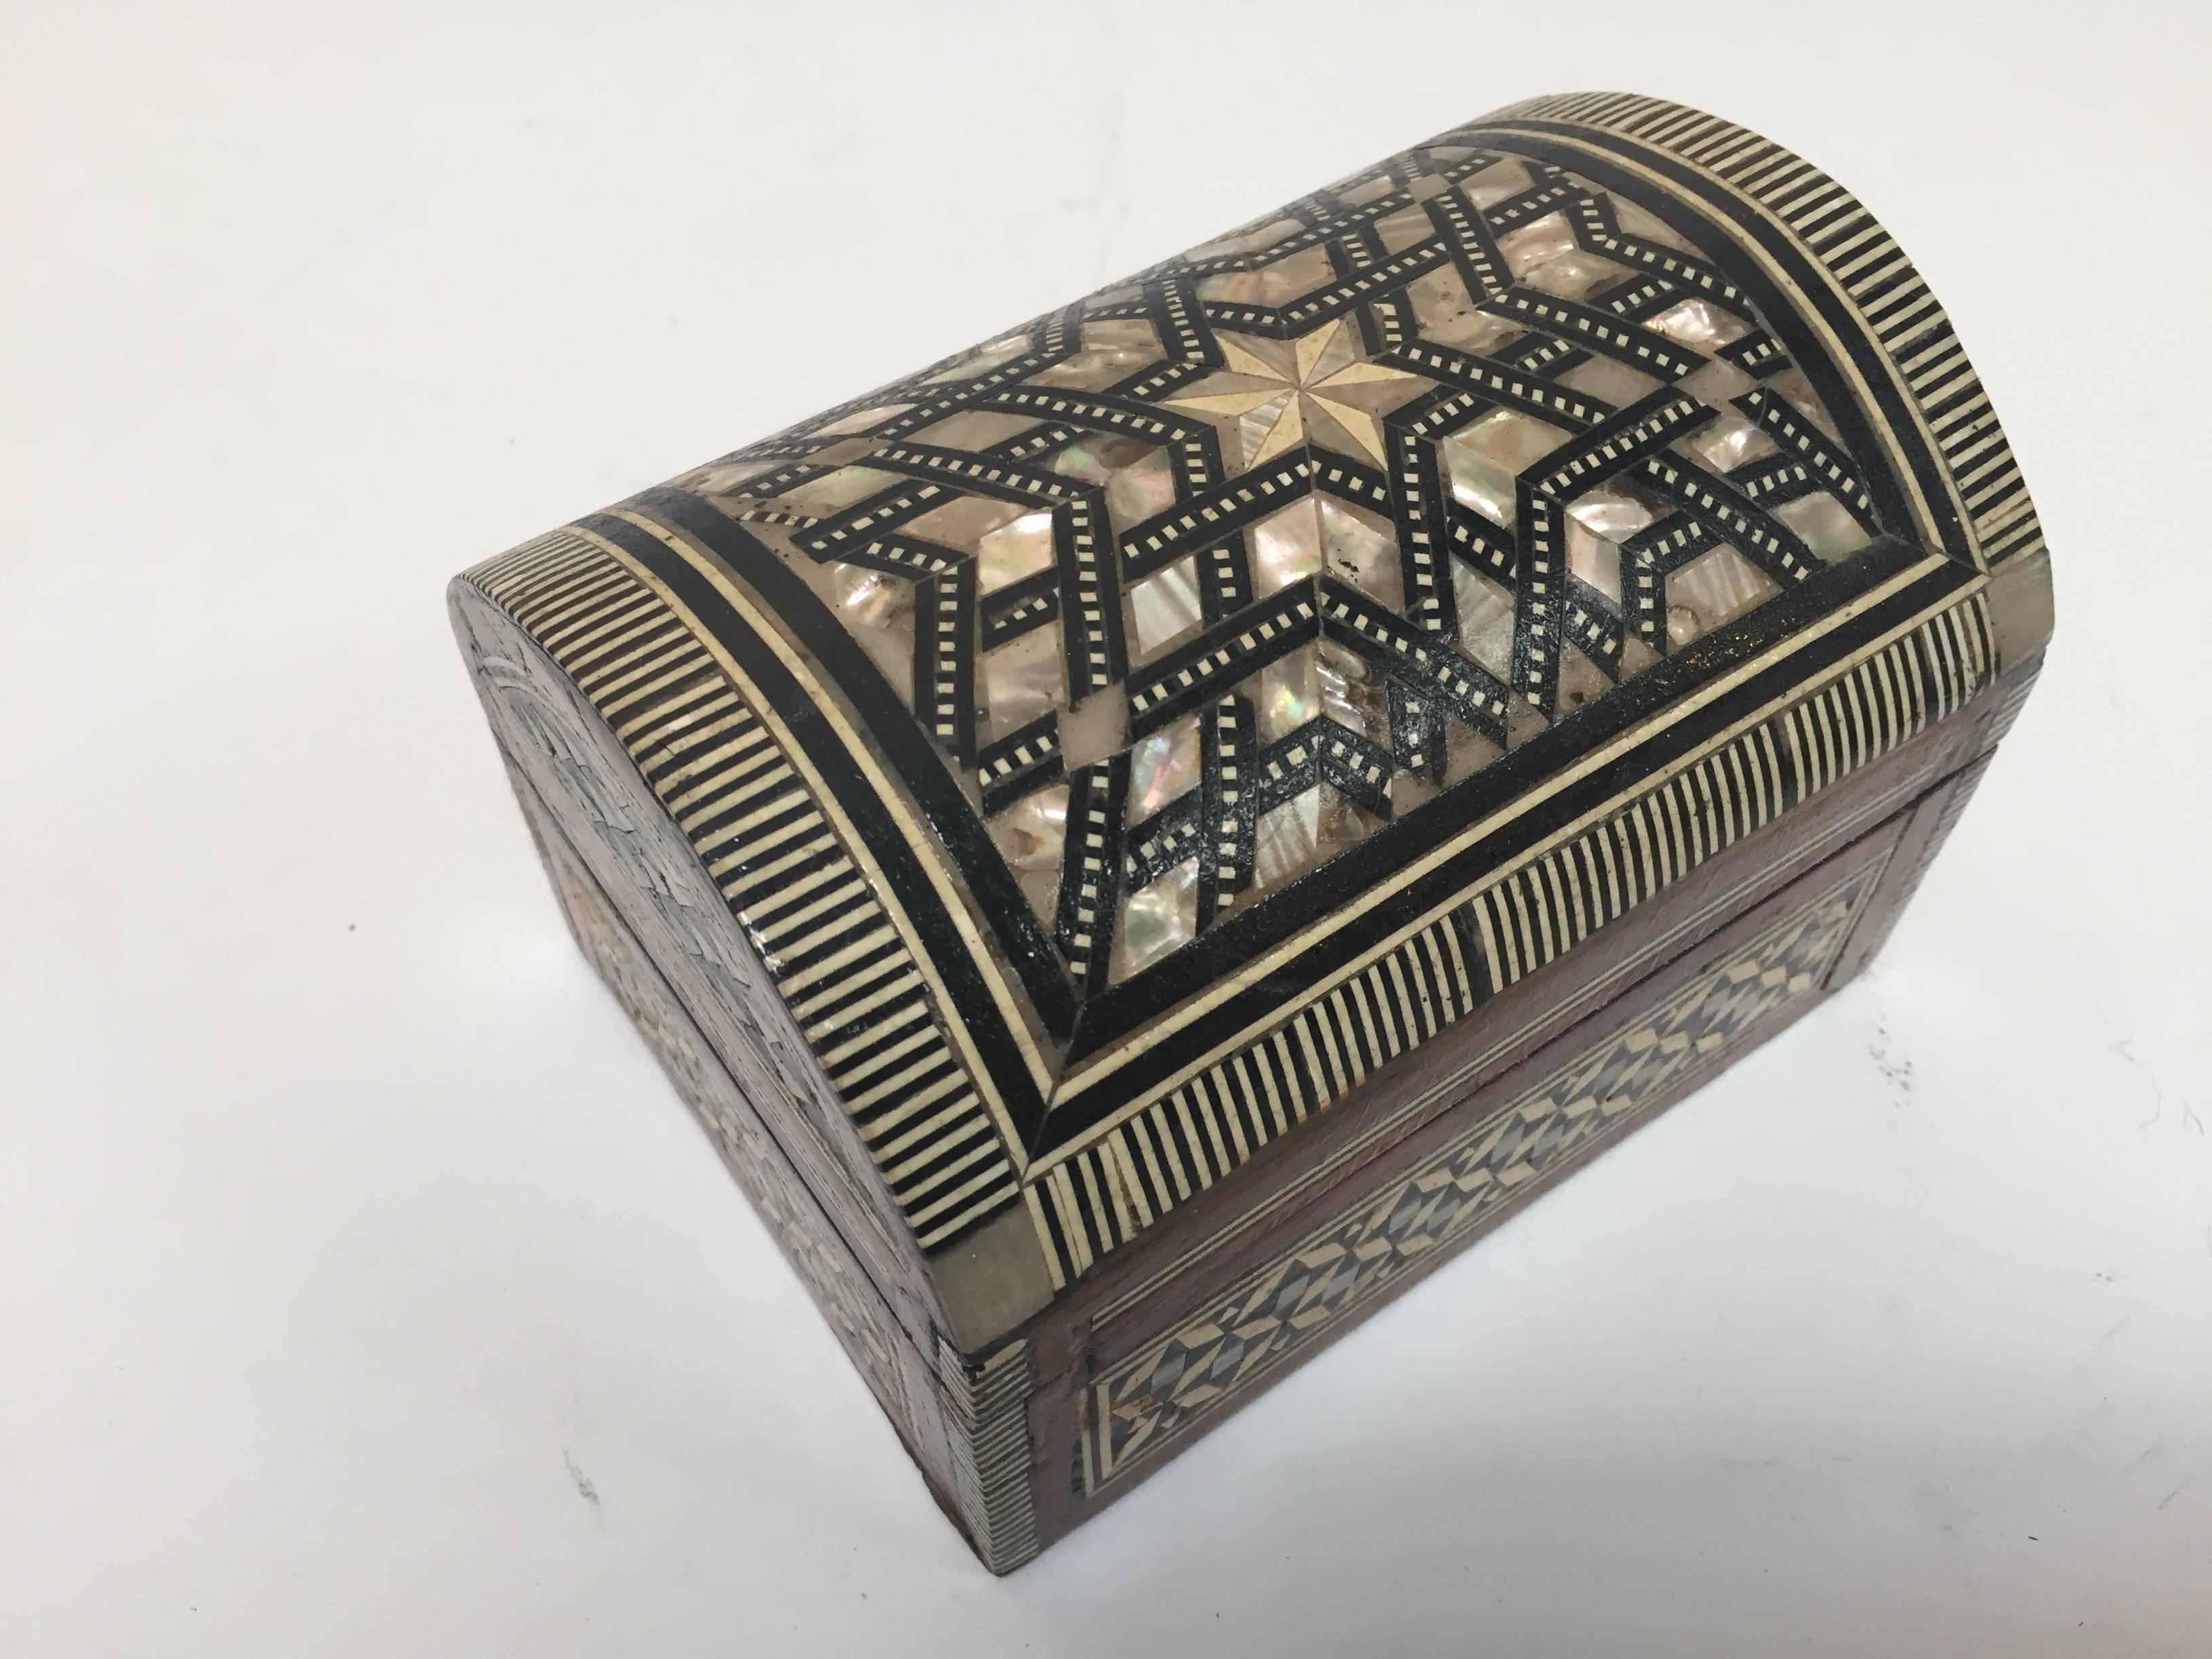 Moorish Middle Eastern Syrian Mother-of-Pearl Inlaid Jewelry Box